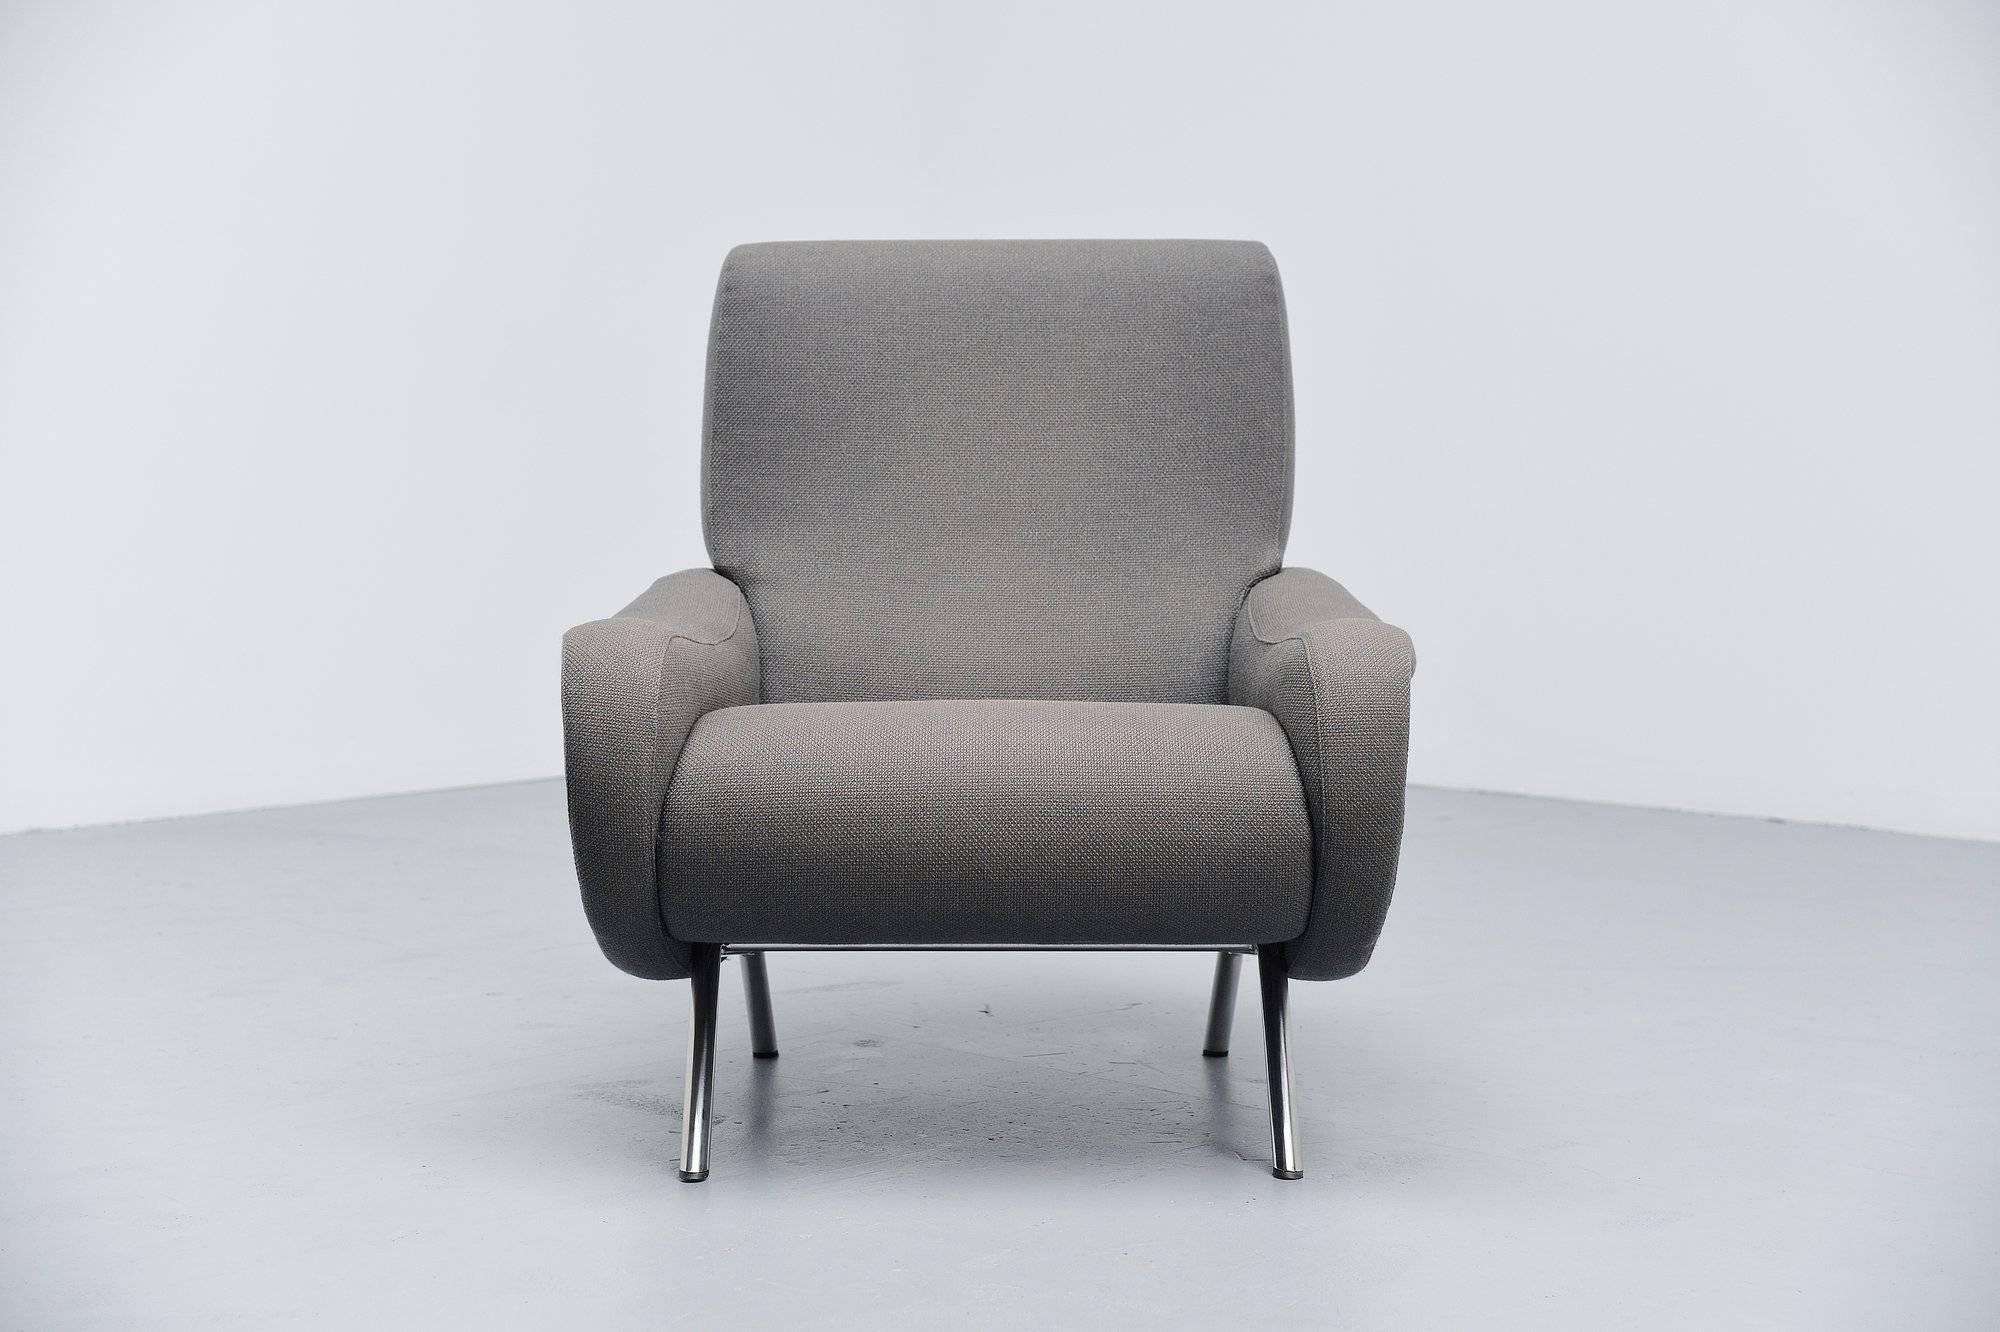 Iconic so called 'Lady chair' designed by Marco Zanuso and manufactured by Arflex, Italy, 1951. This lady chair has chrome-plated legs and original upholstery in grey. The upholstery is in amazing condition still and the foam is excellent too. This